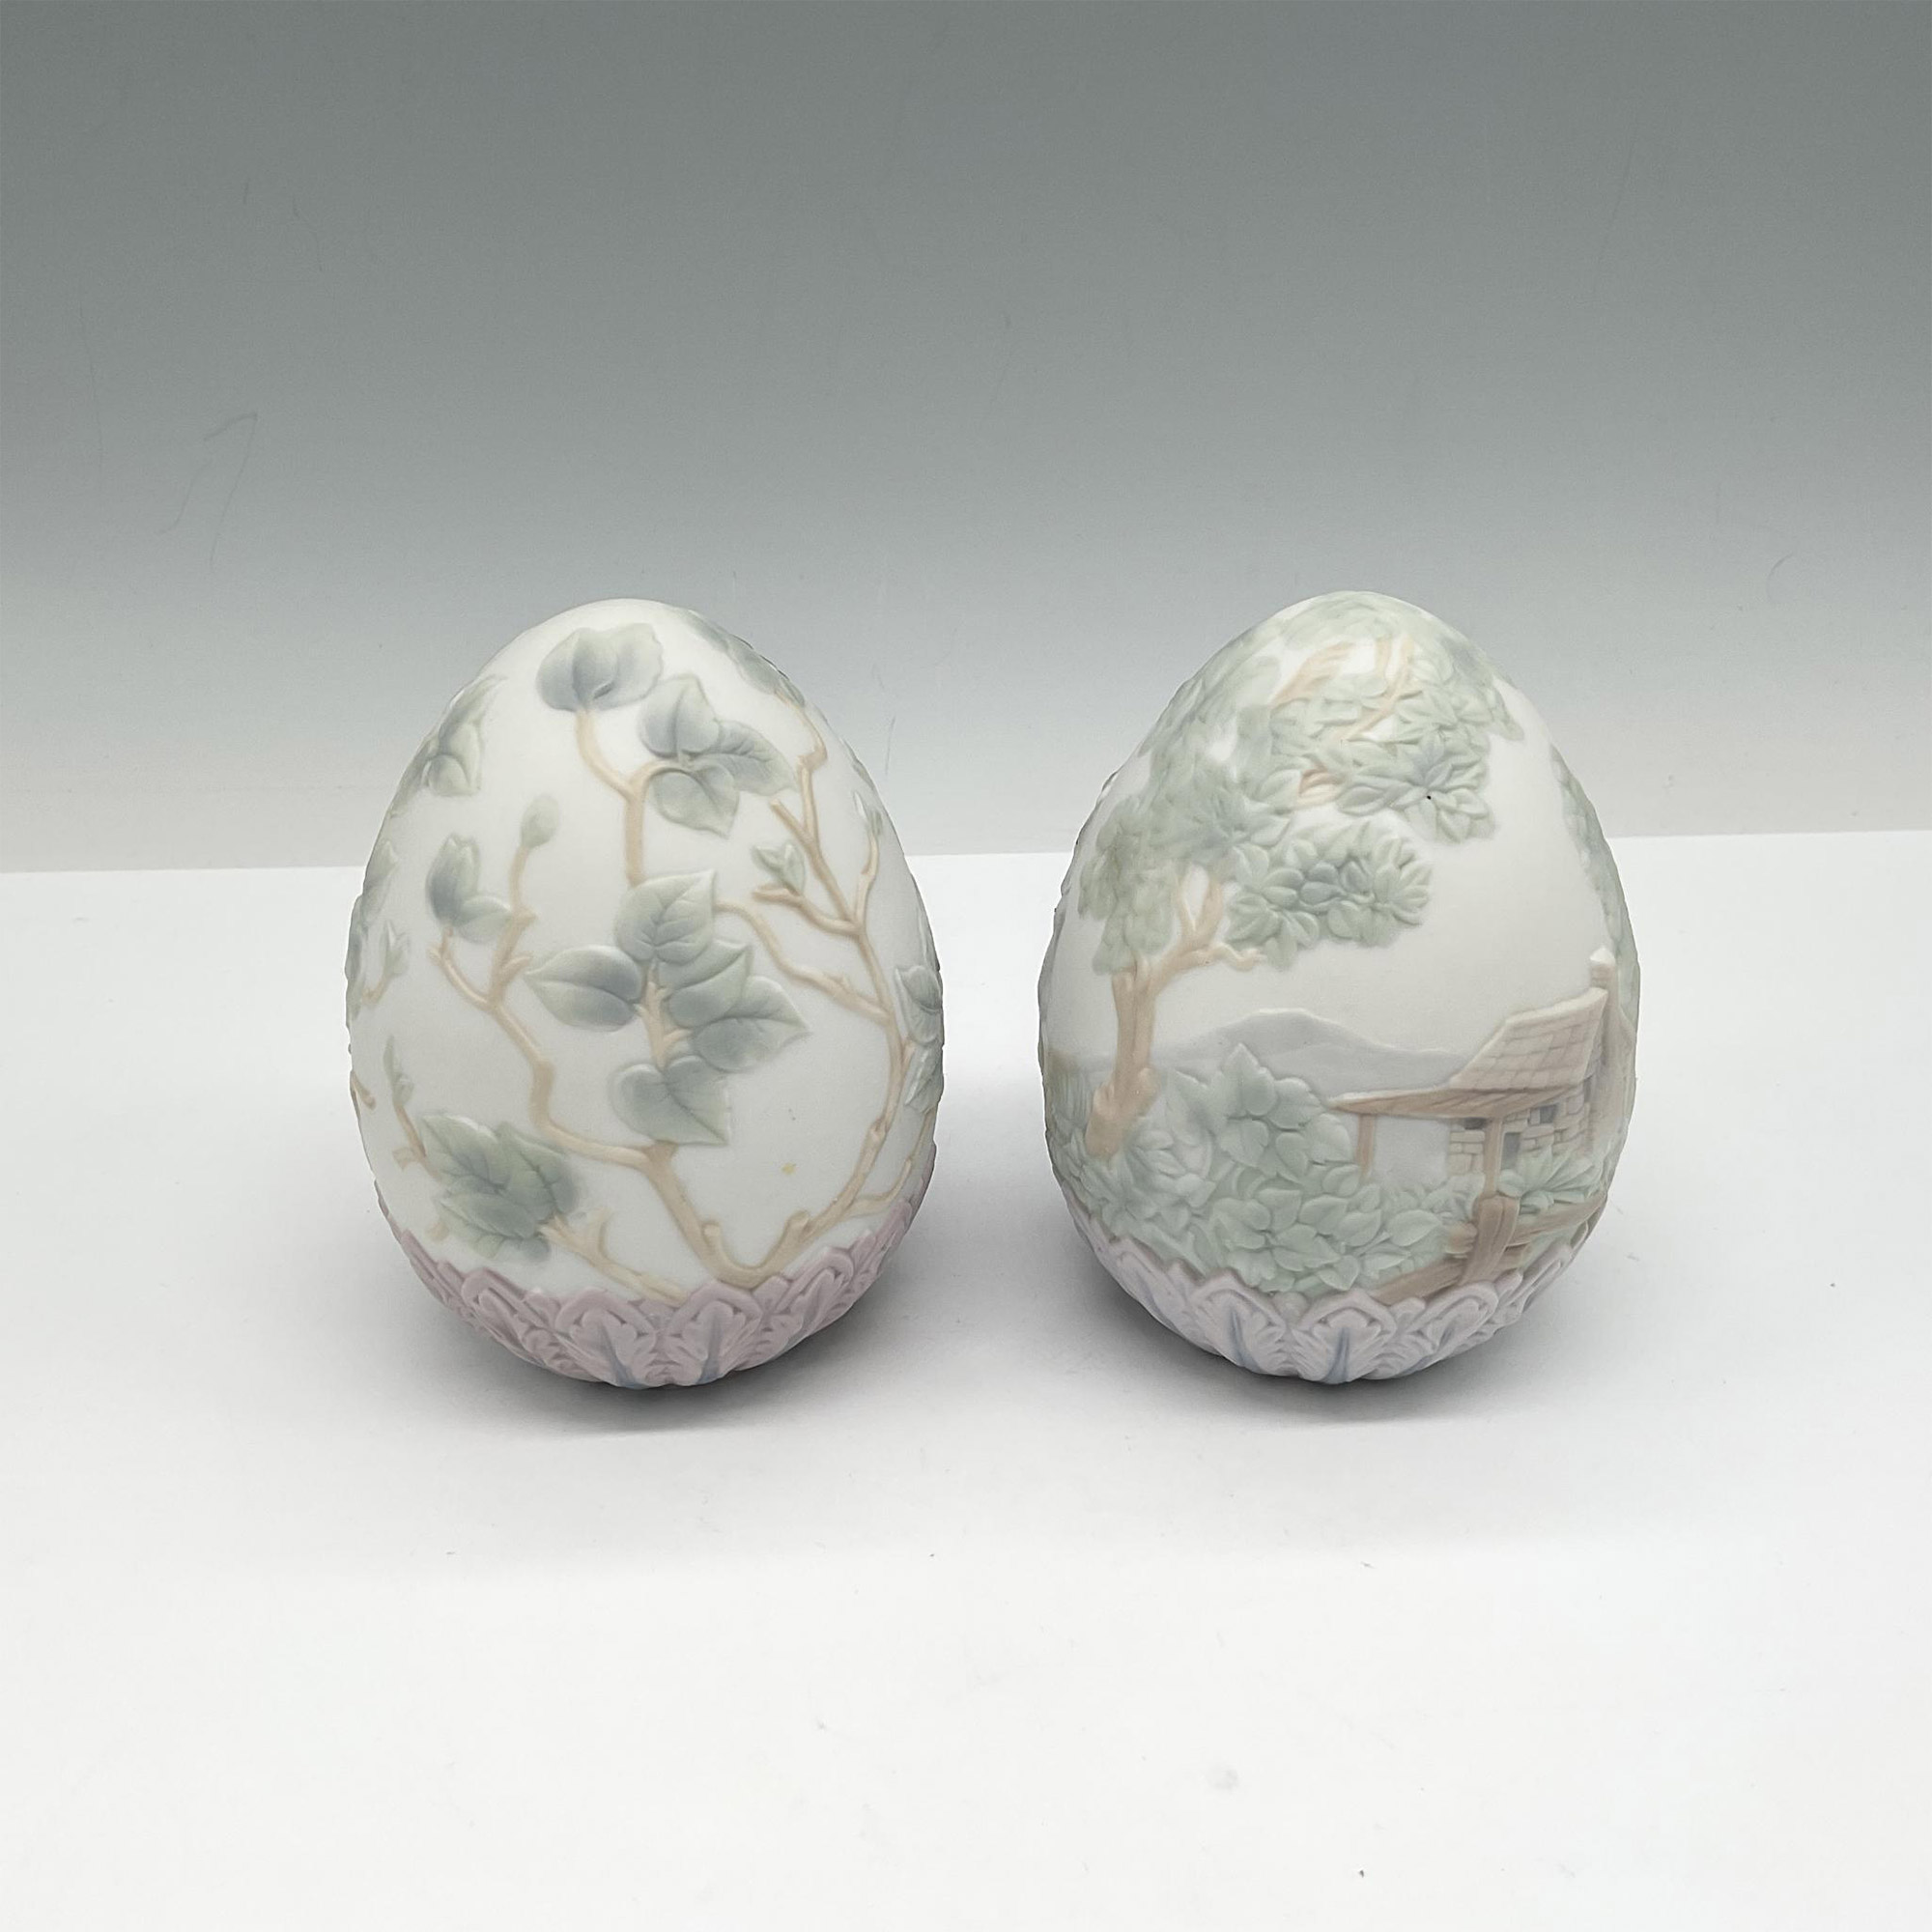 2pc Lladro Porcelain Limited Edition Eggs, 1993 & 1995 - Image 2 of 4